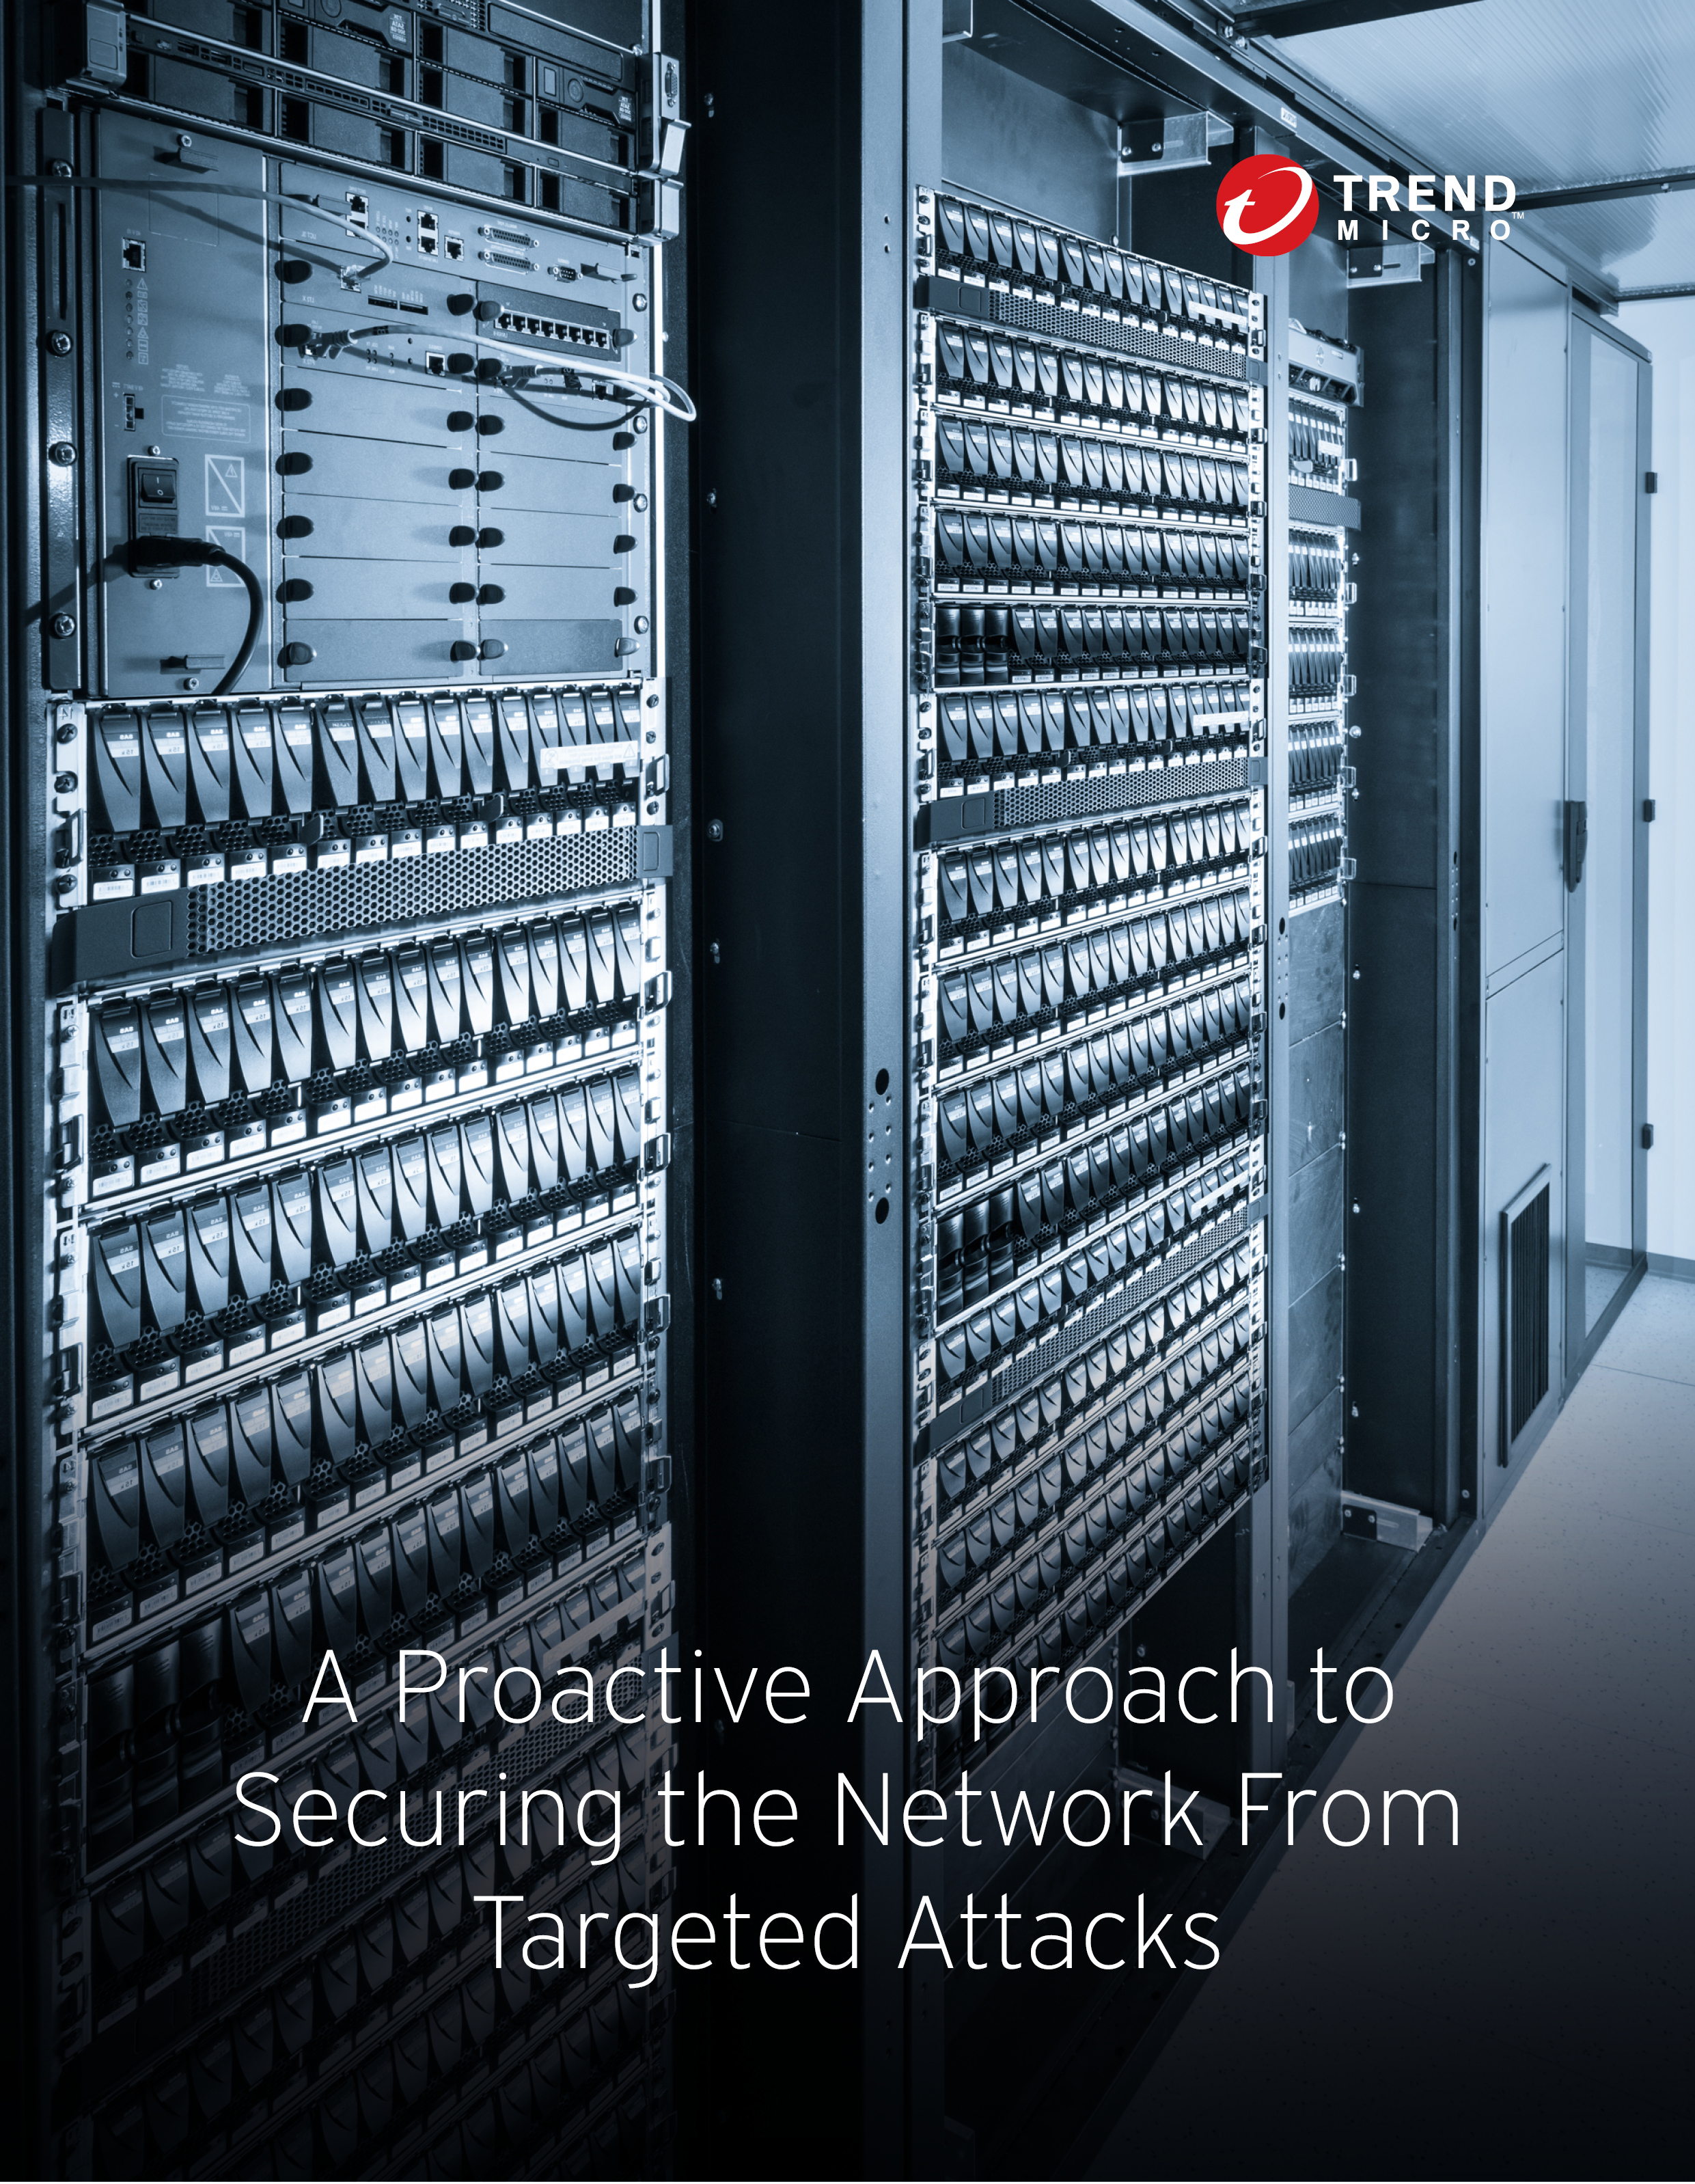 How Can the Network Be Protected From Targeted Attacks?